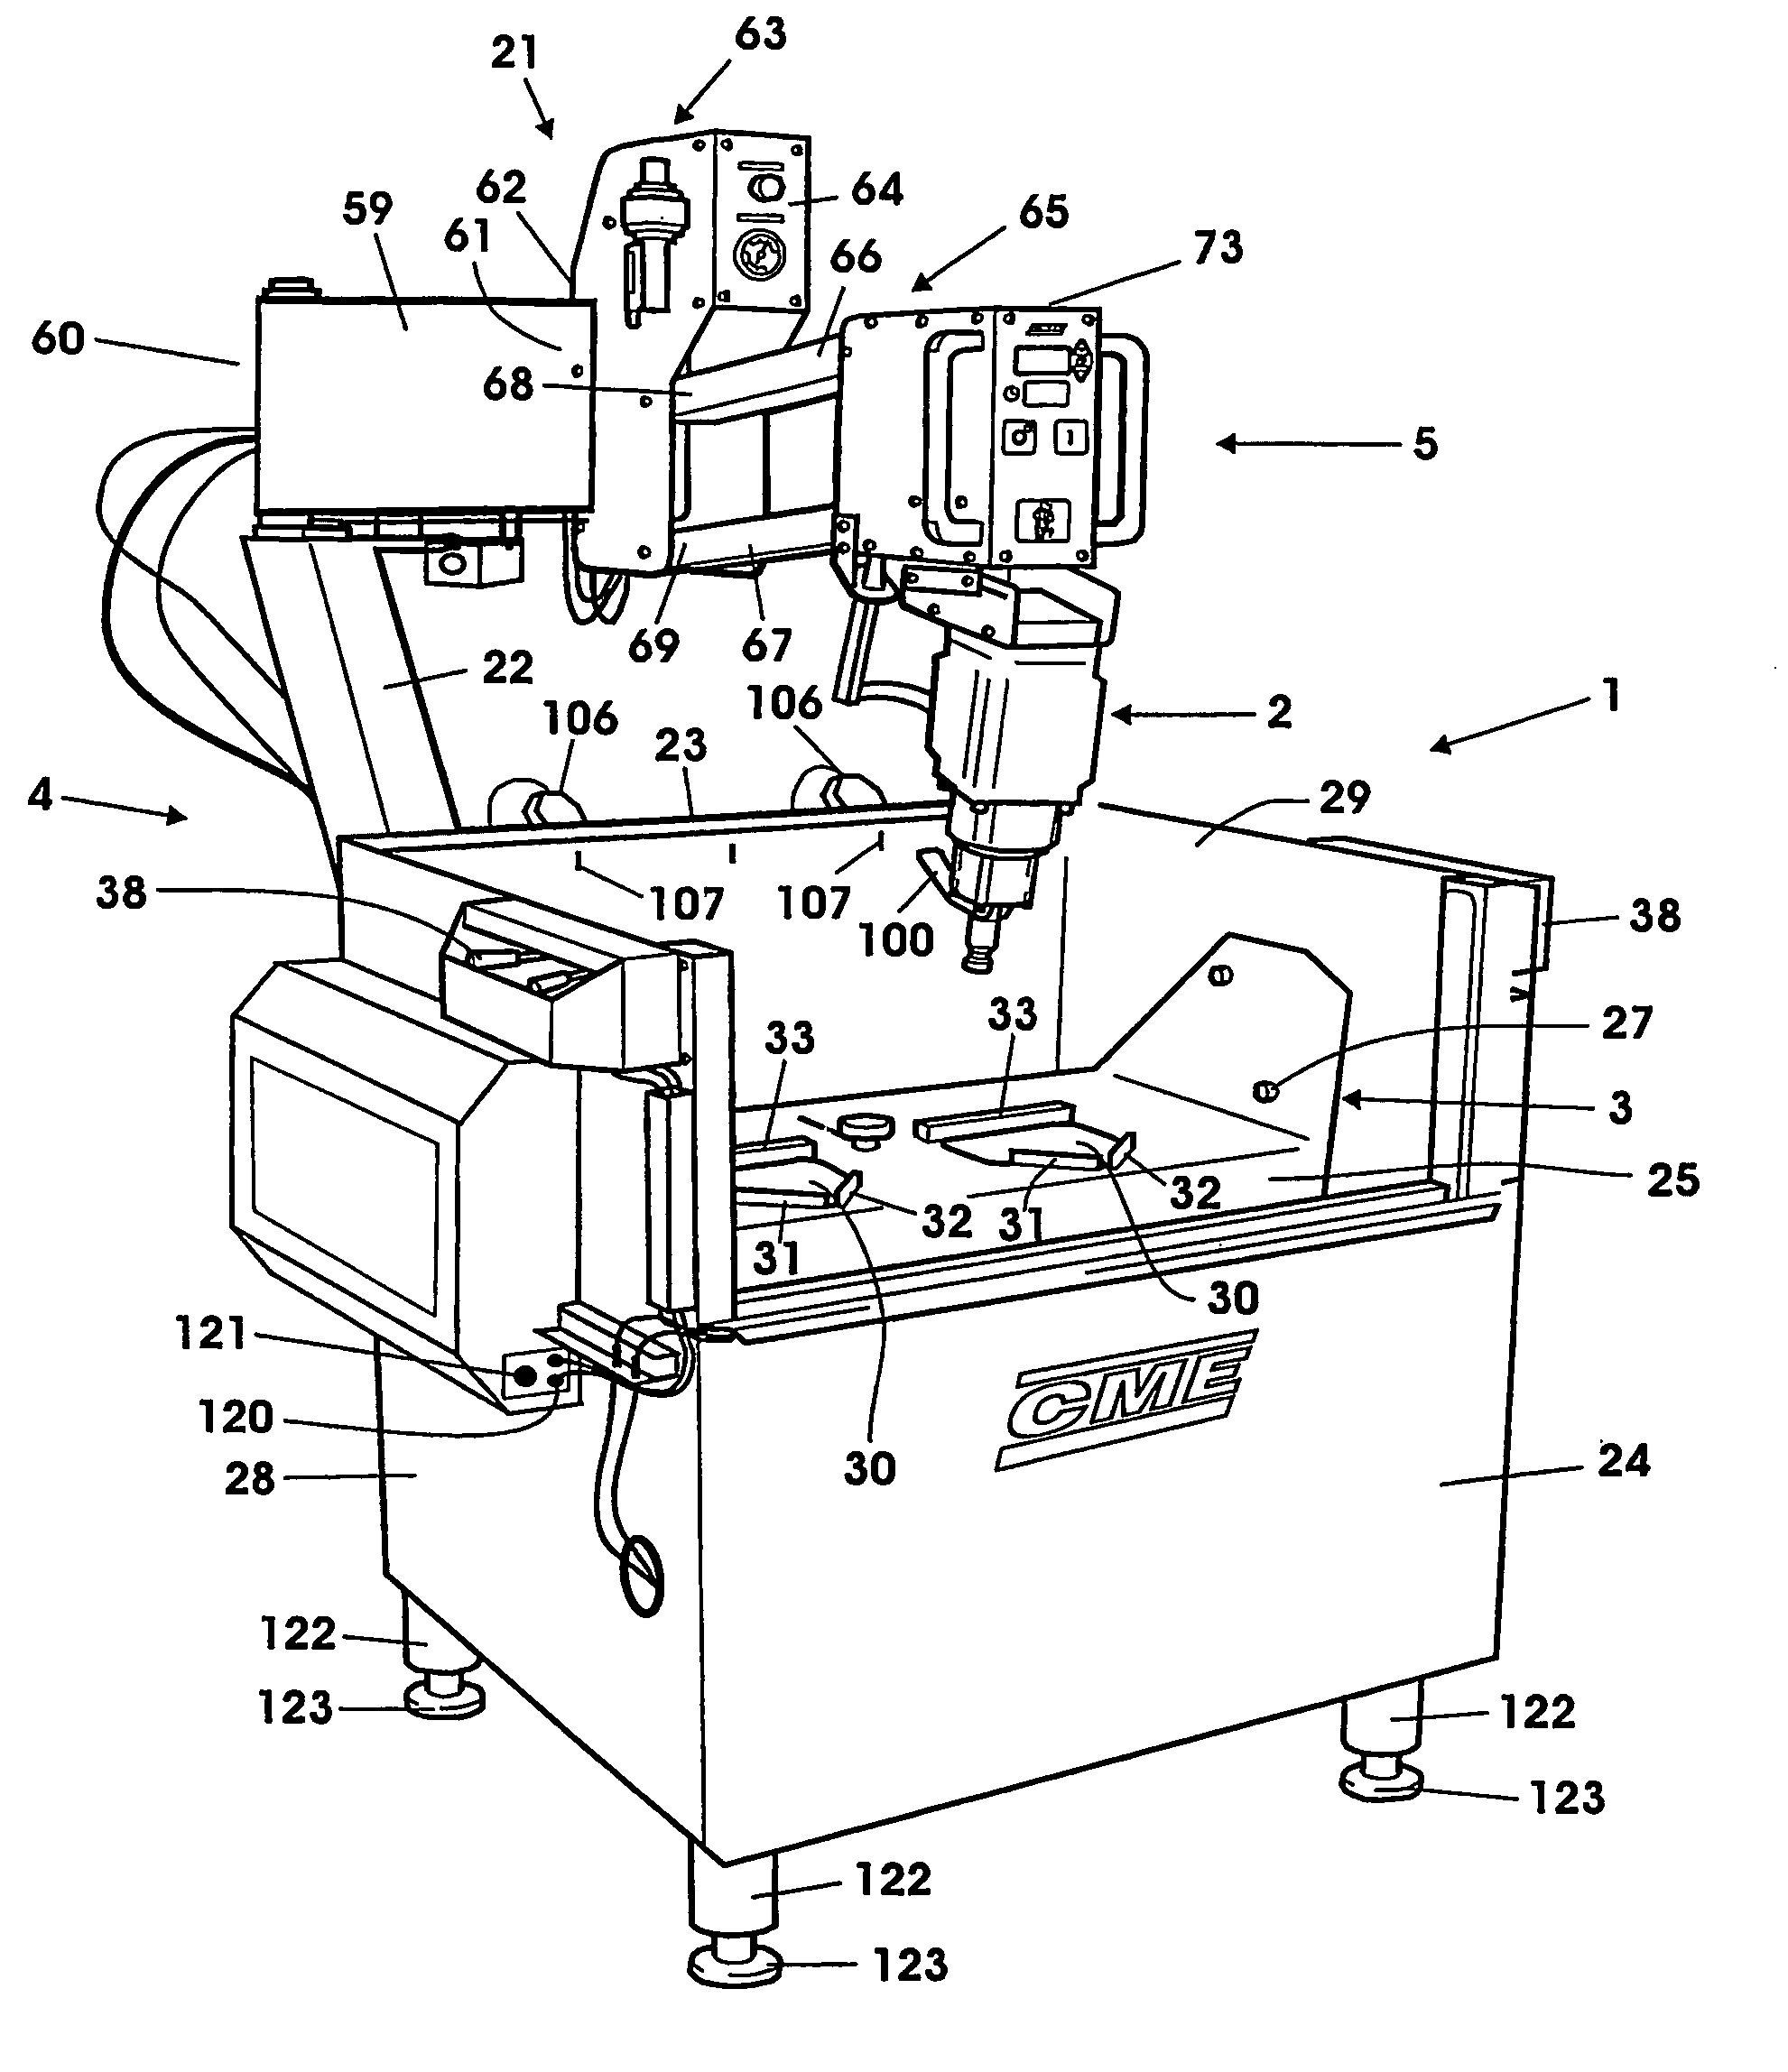 Grinding apparatus for buttons on rock drill bit